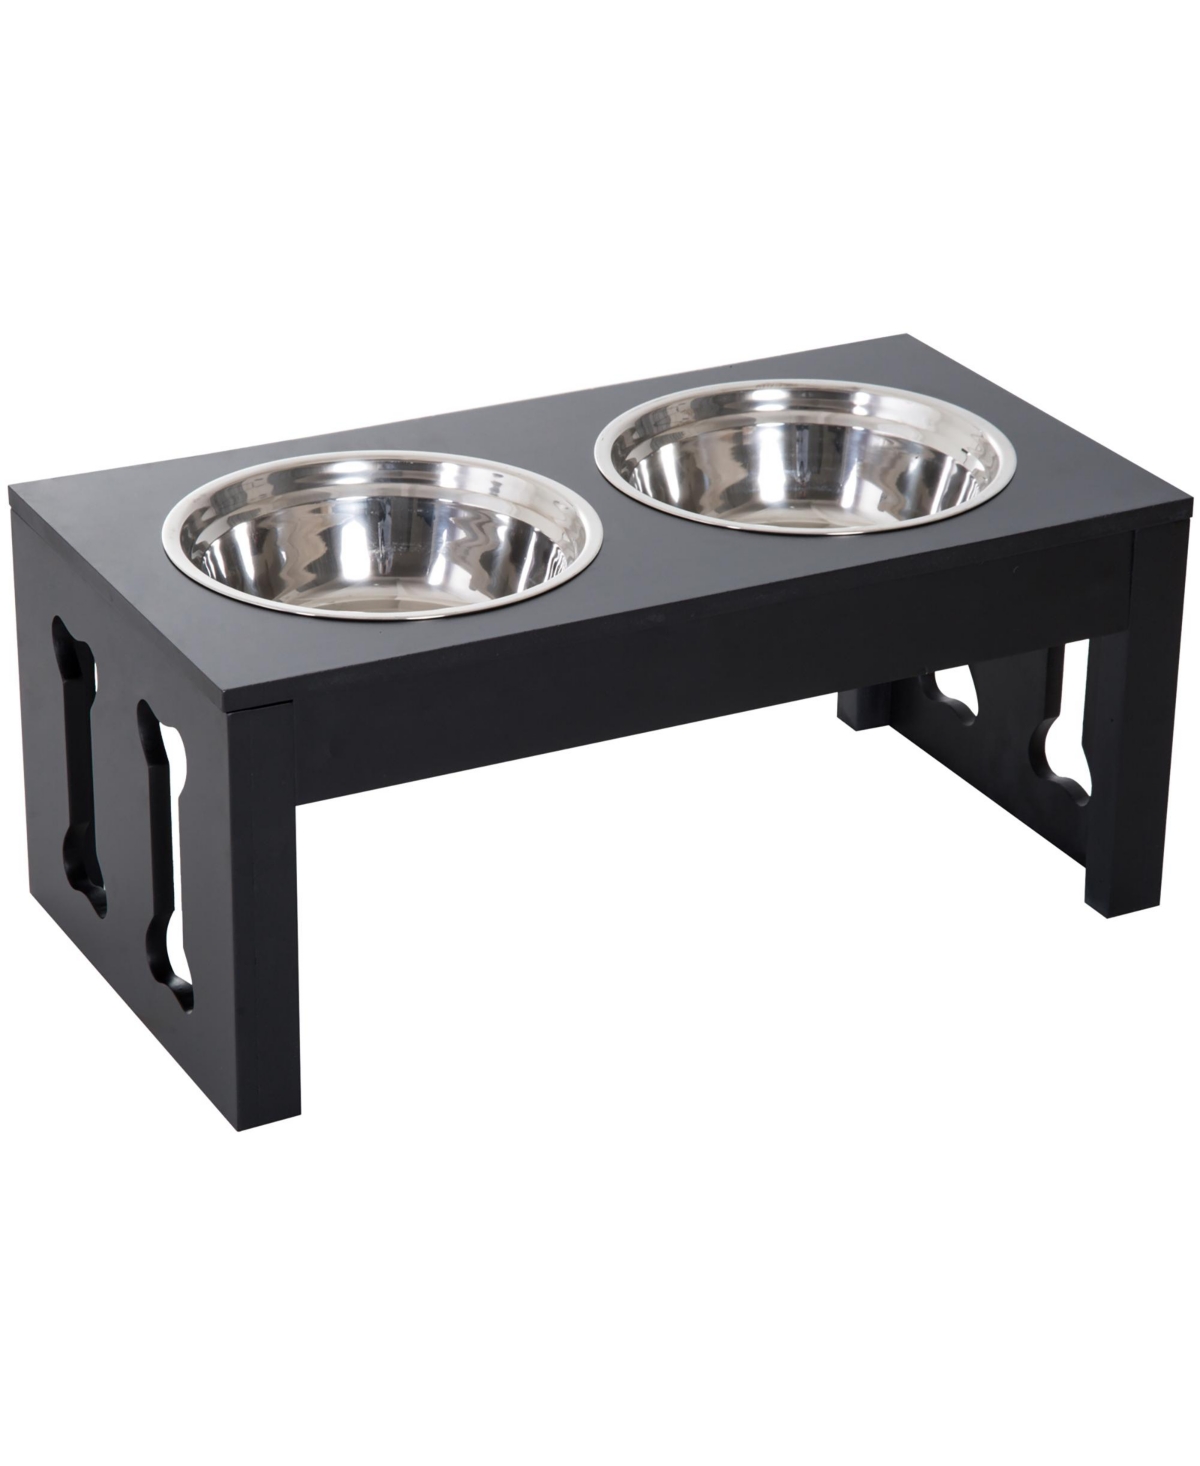 10" Elevated Raised Dog Feeder Stainless Steel Double Bowl Food Water - Black